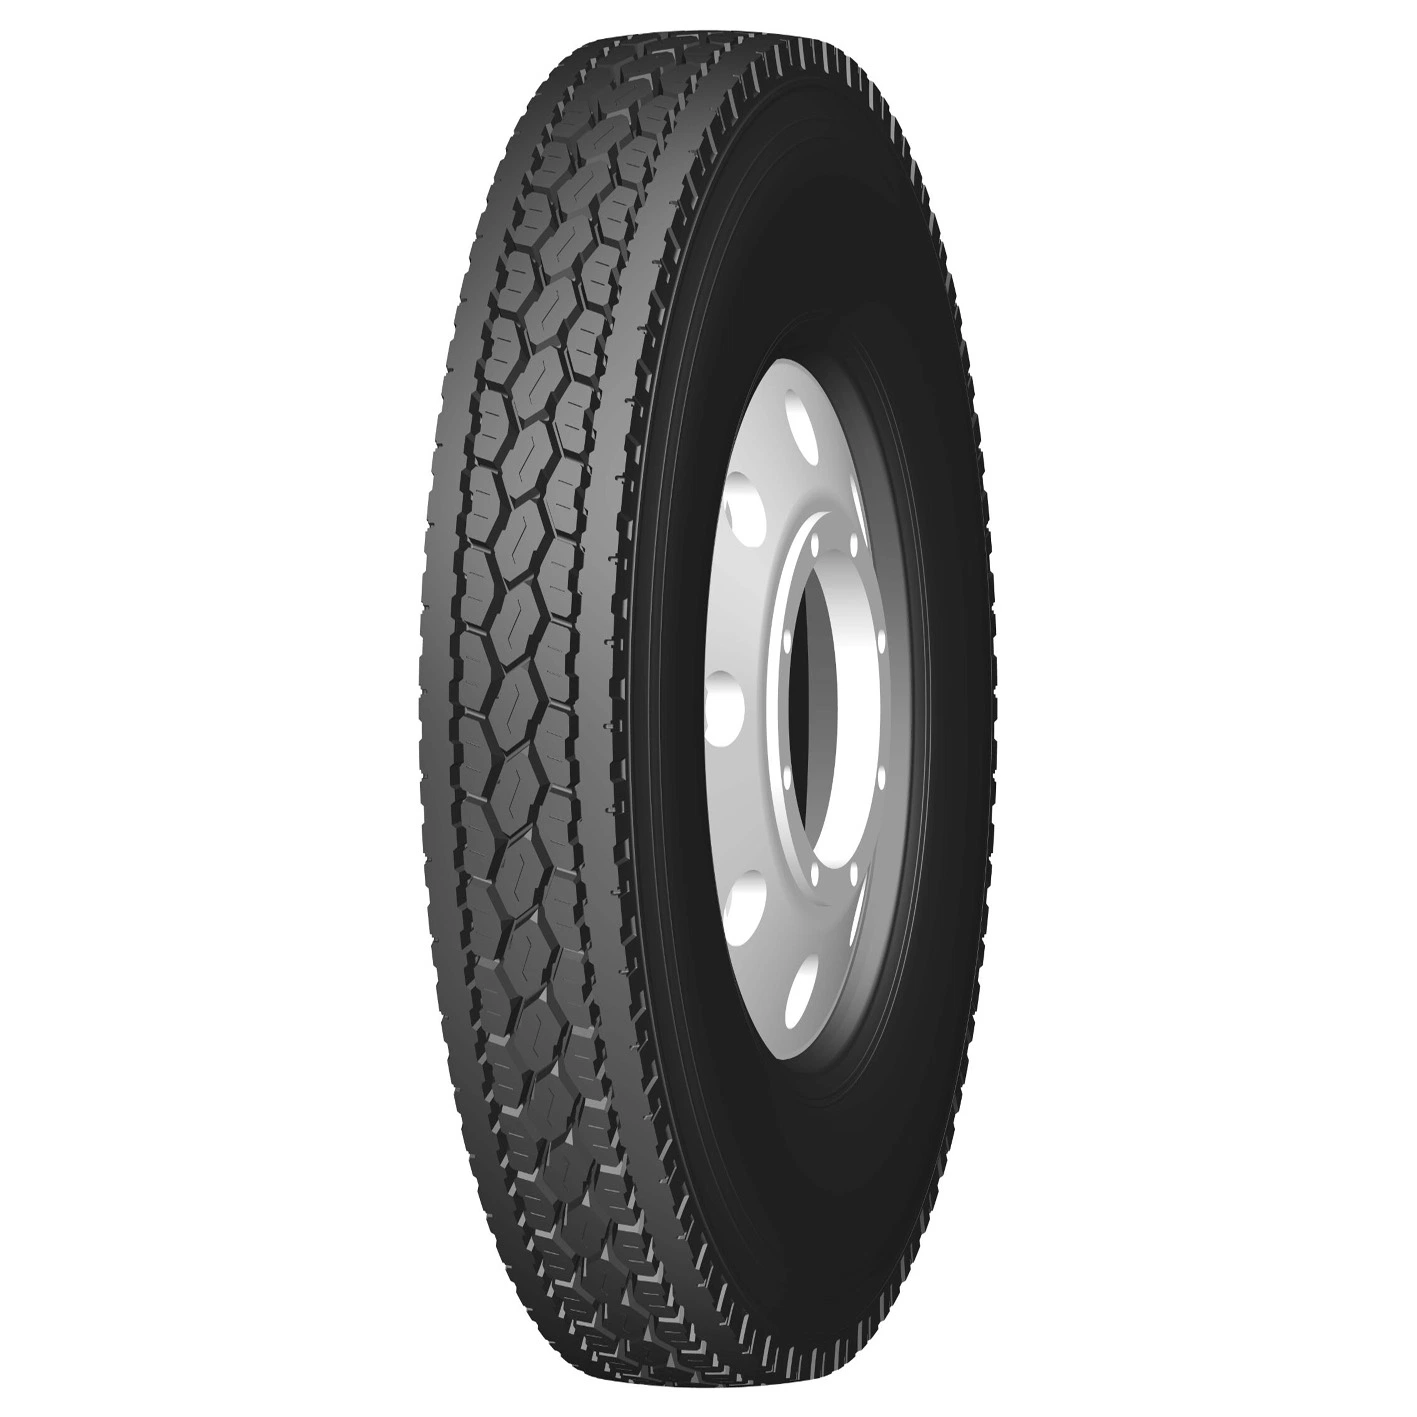 10.00R20 Suitable for International market Manufactured by best Truck tire factory with wide range of sizes reliable service High Performance Rubber TBR Tires